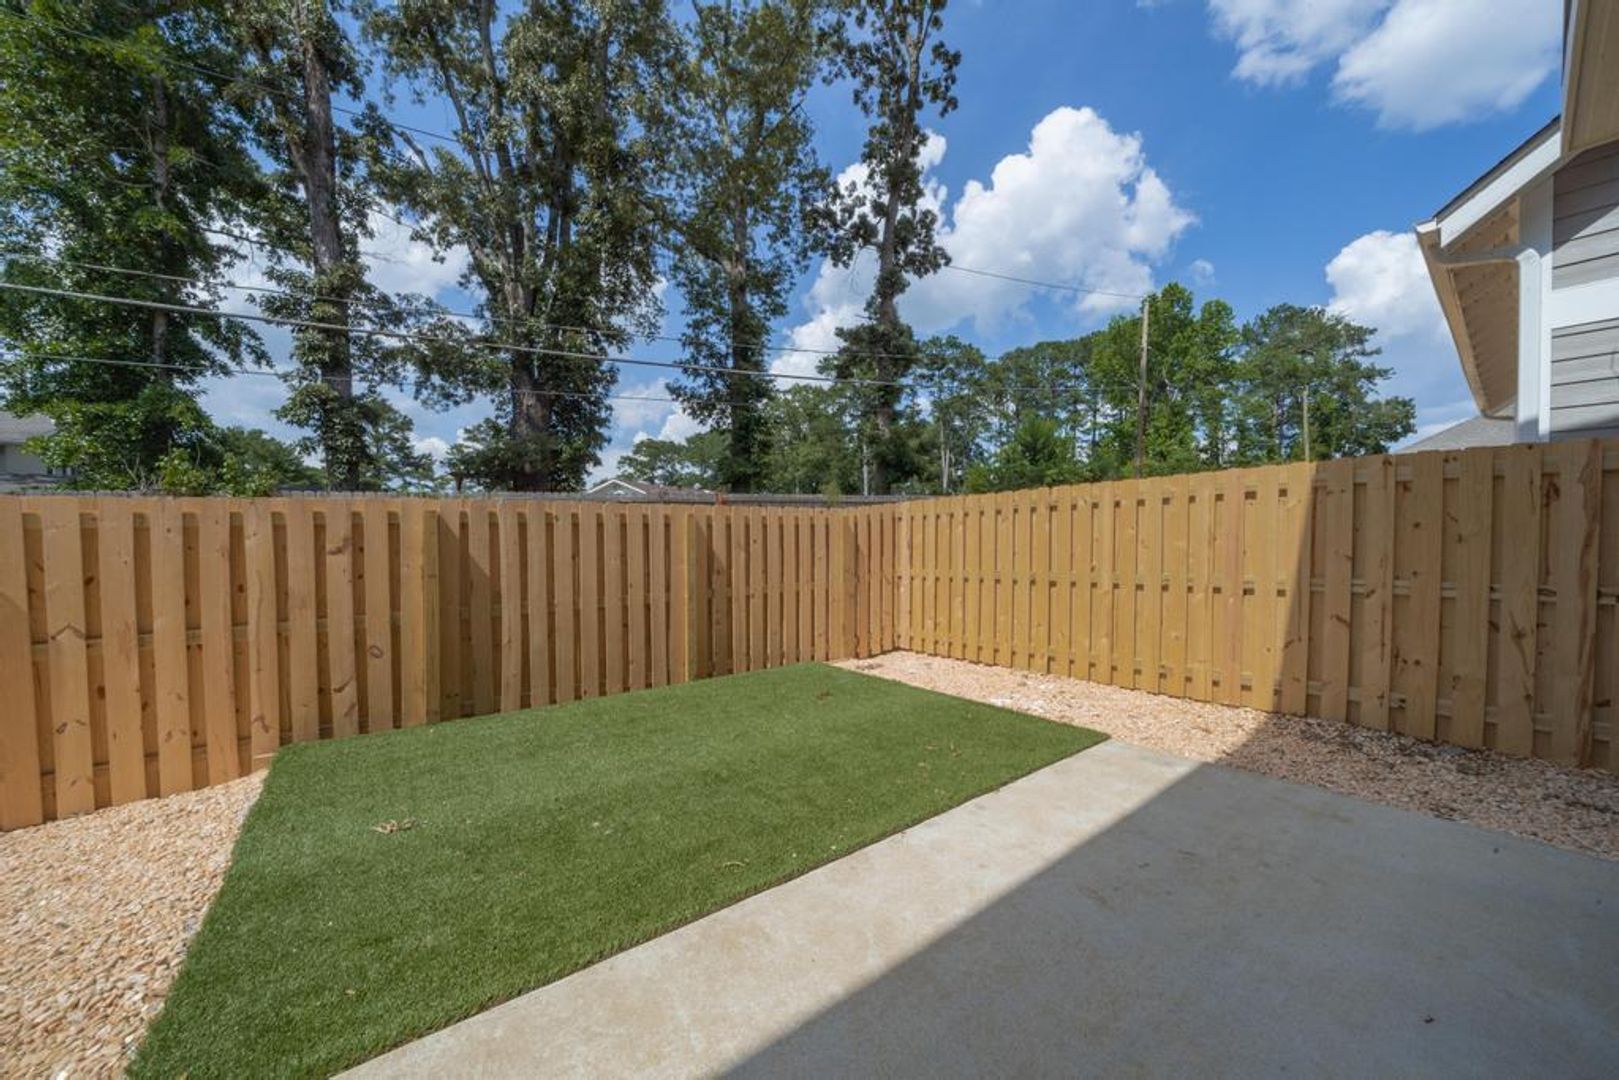 Patton Crest backyard with fencing and grass area for pets